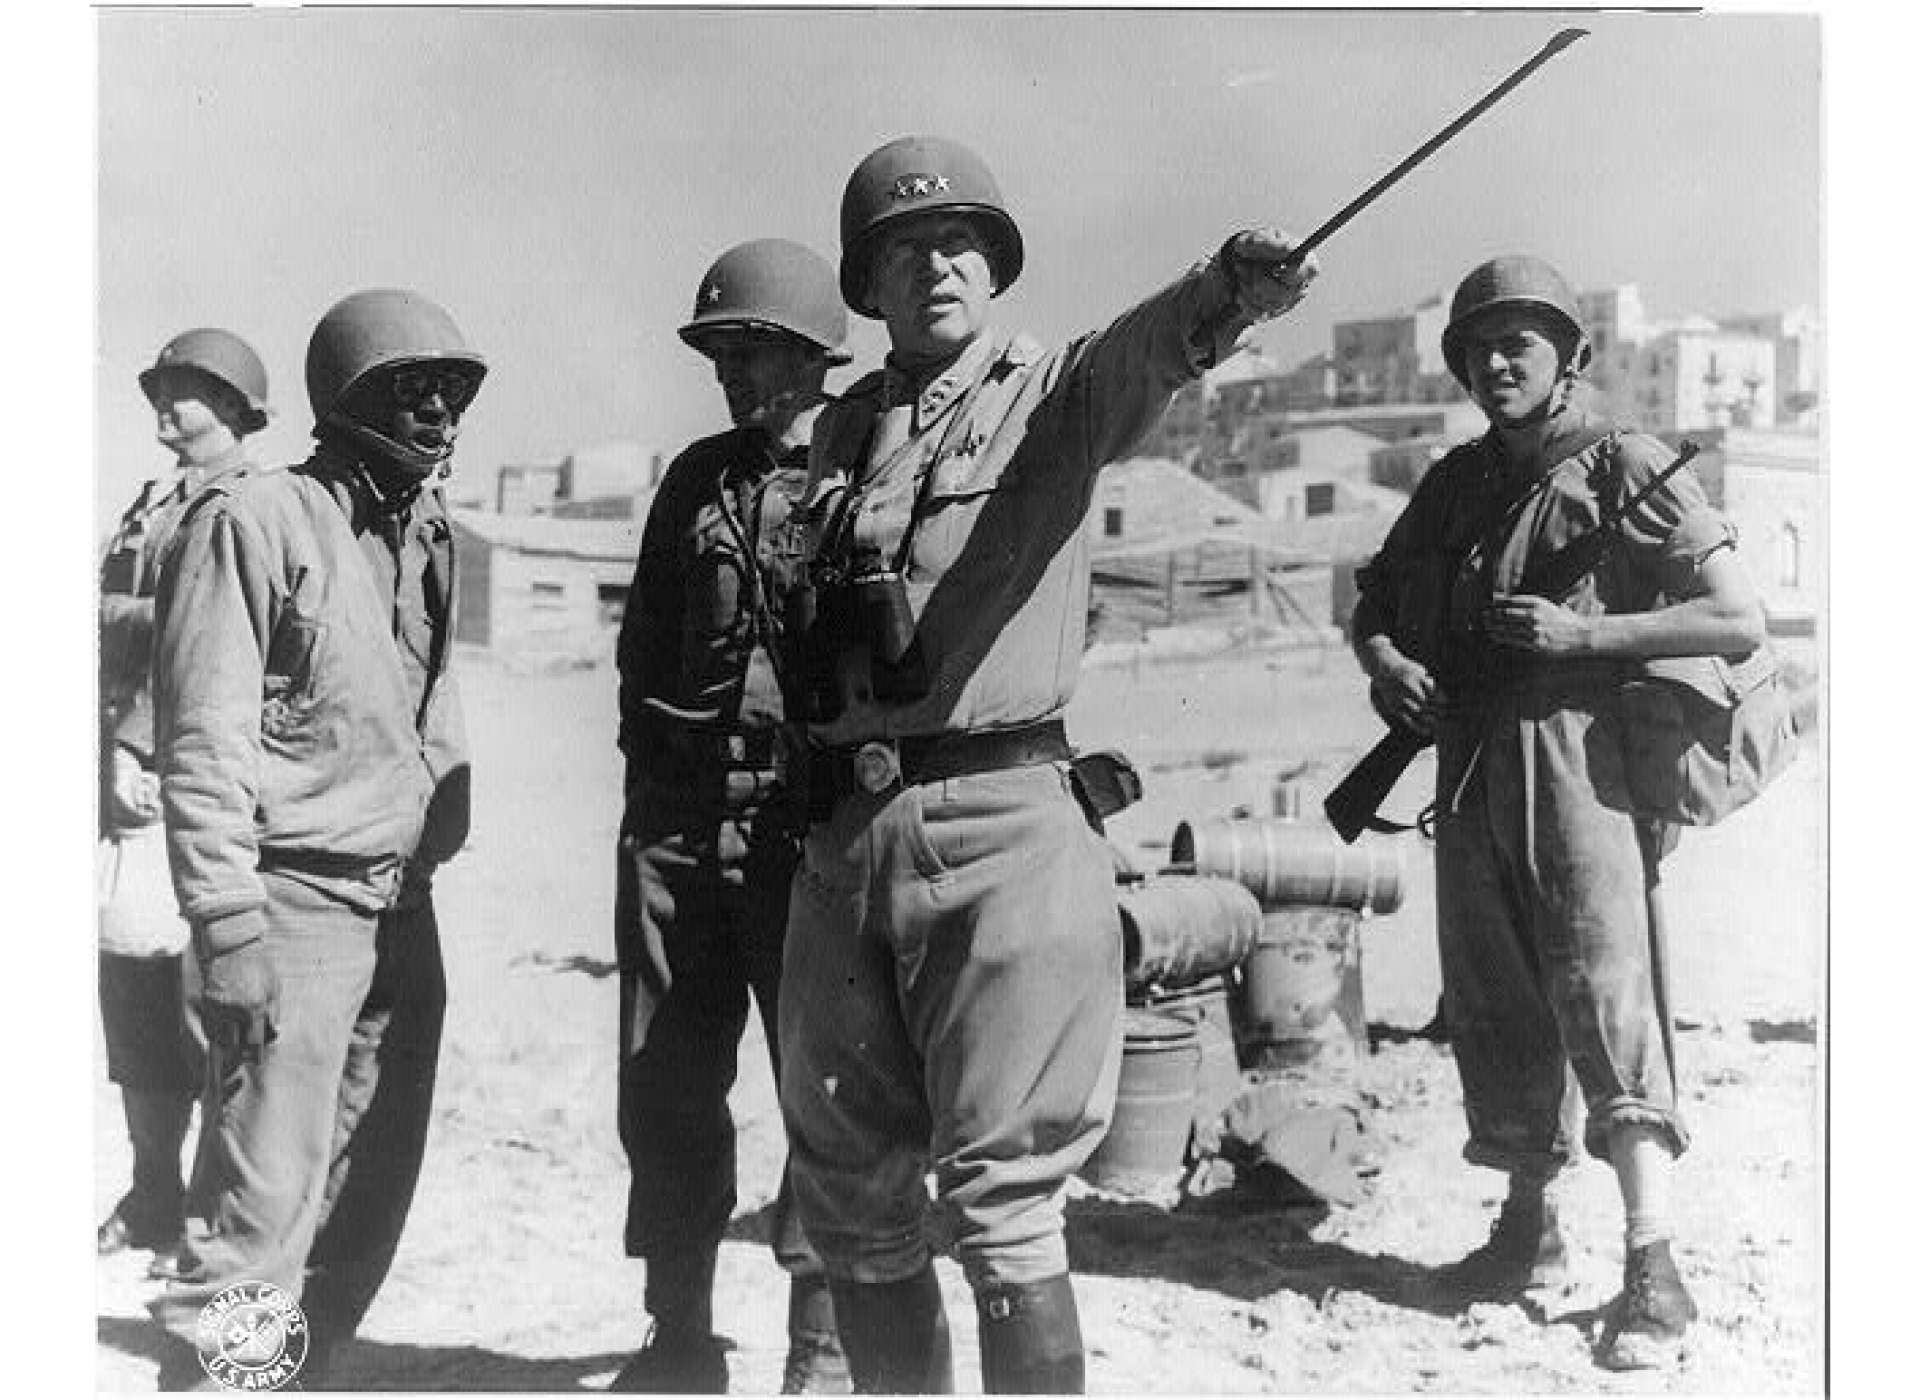 General George S. Patton, commander of US Seventh Army, instructing troops on Sicily, July 1943. US Army Signal Corps Photo No. 175663, 7-11-4, Library of Congress Prints and Photographs Division Washington, D.C. 20540 USA.